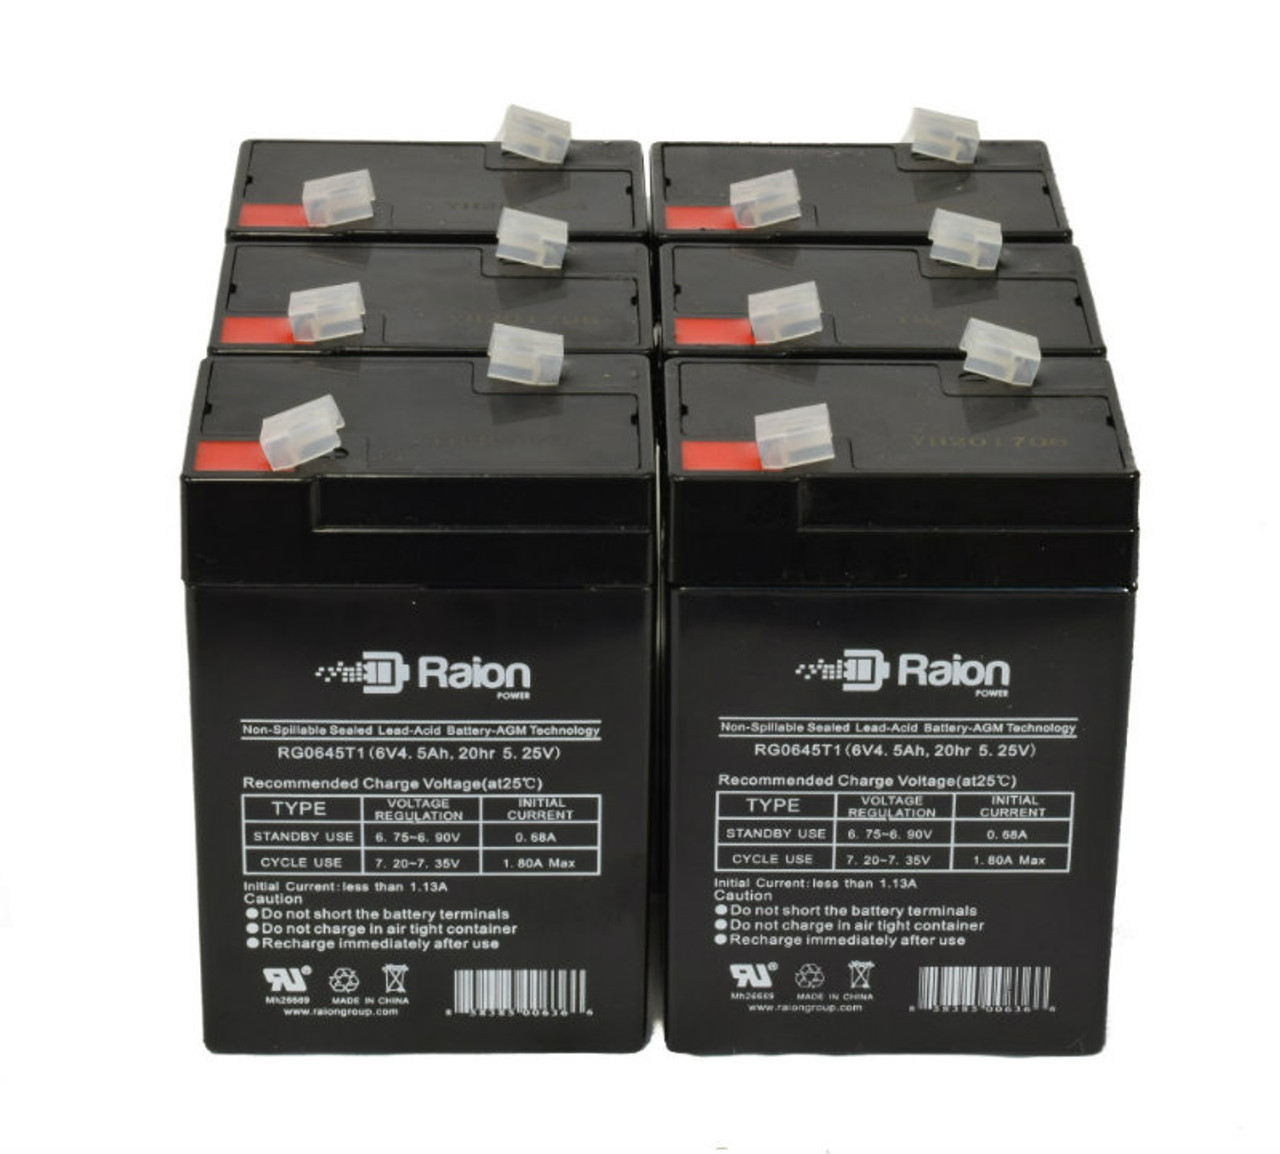 Raion Power 6V 4.5Ah Replacement Emergency Light Battery for National Power GS012P3-LL - 6 Pack